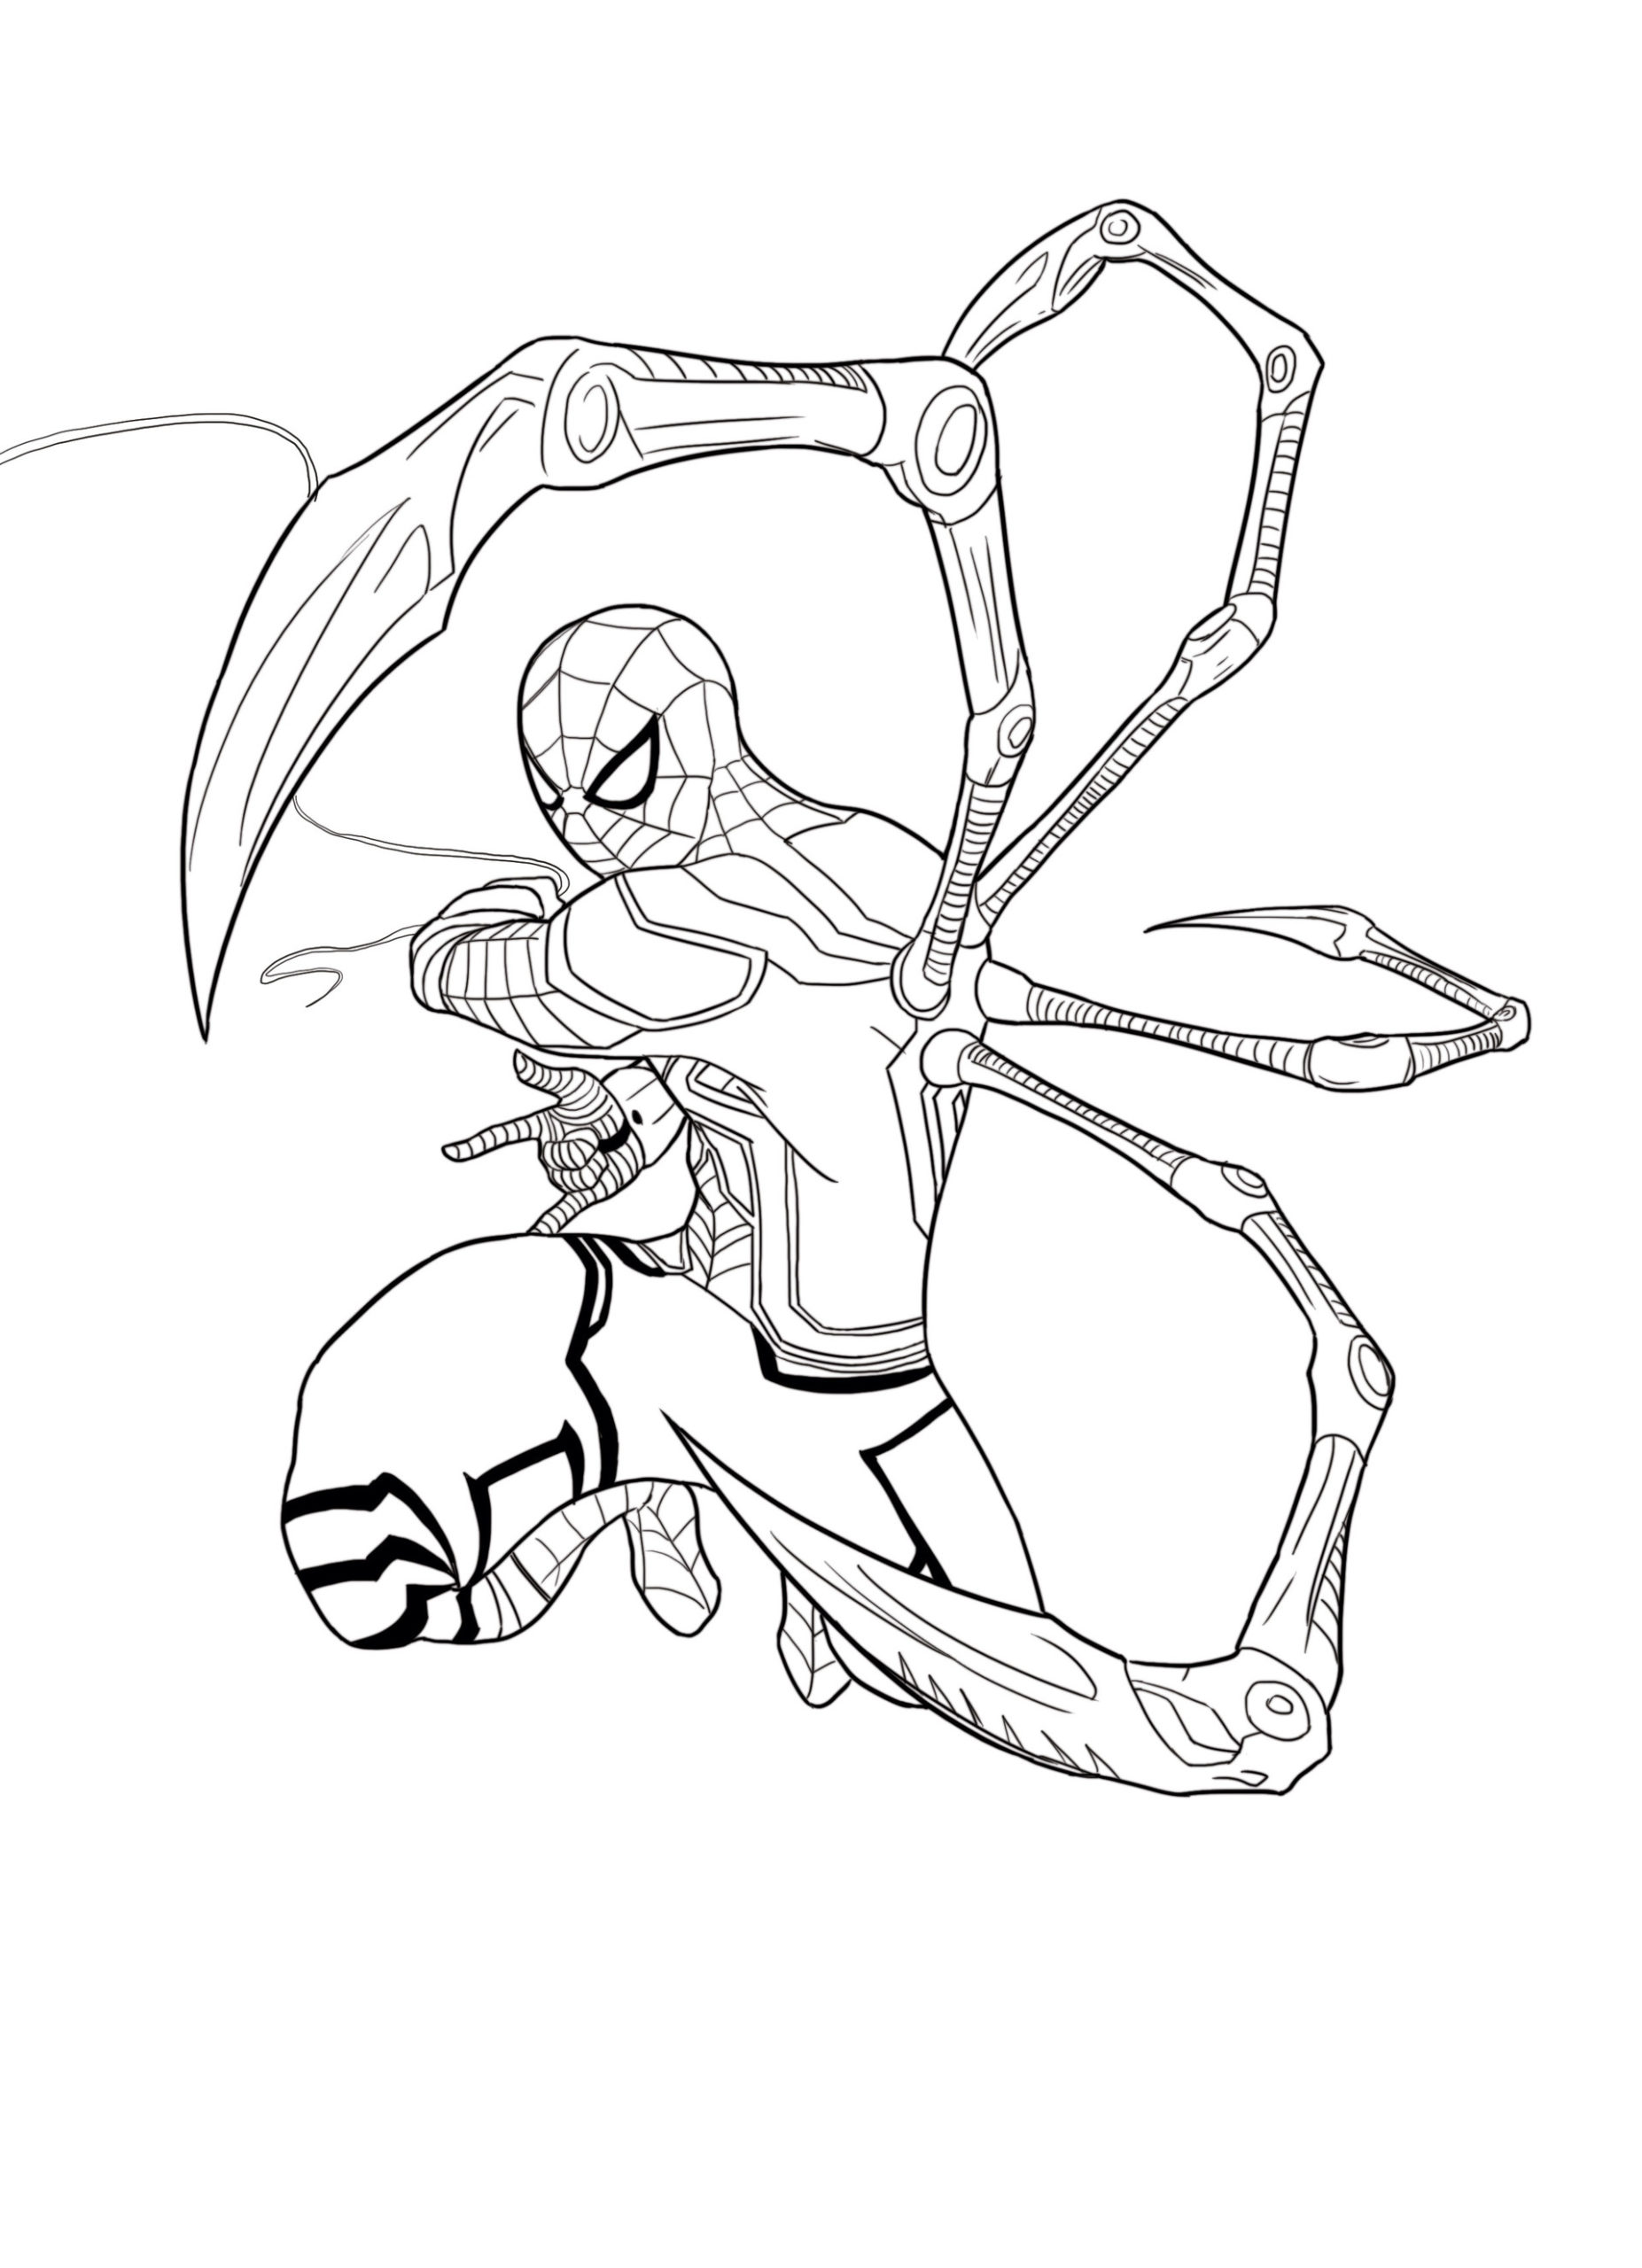 Iron Spiderman Coloring Pages | New Pictures Free Printable